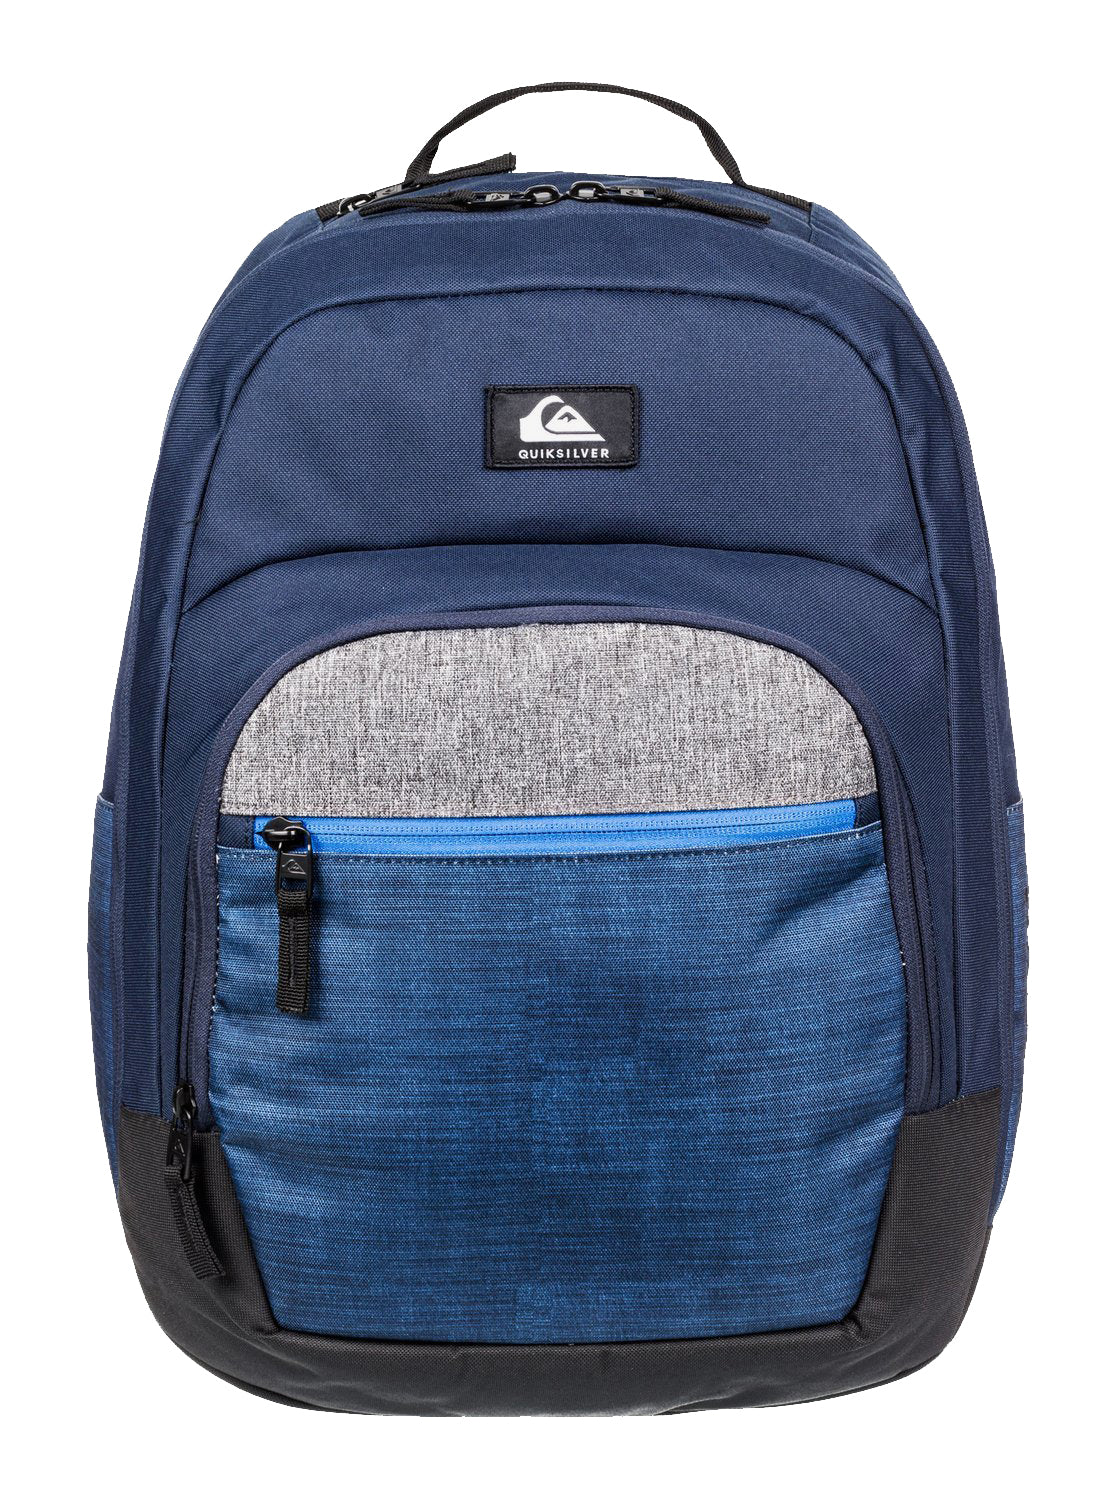 Quiksilver Schoolie Cooler 25L Backpack BYJH OS